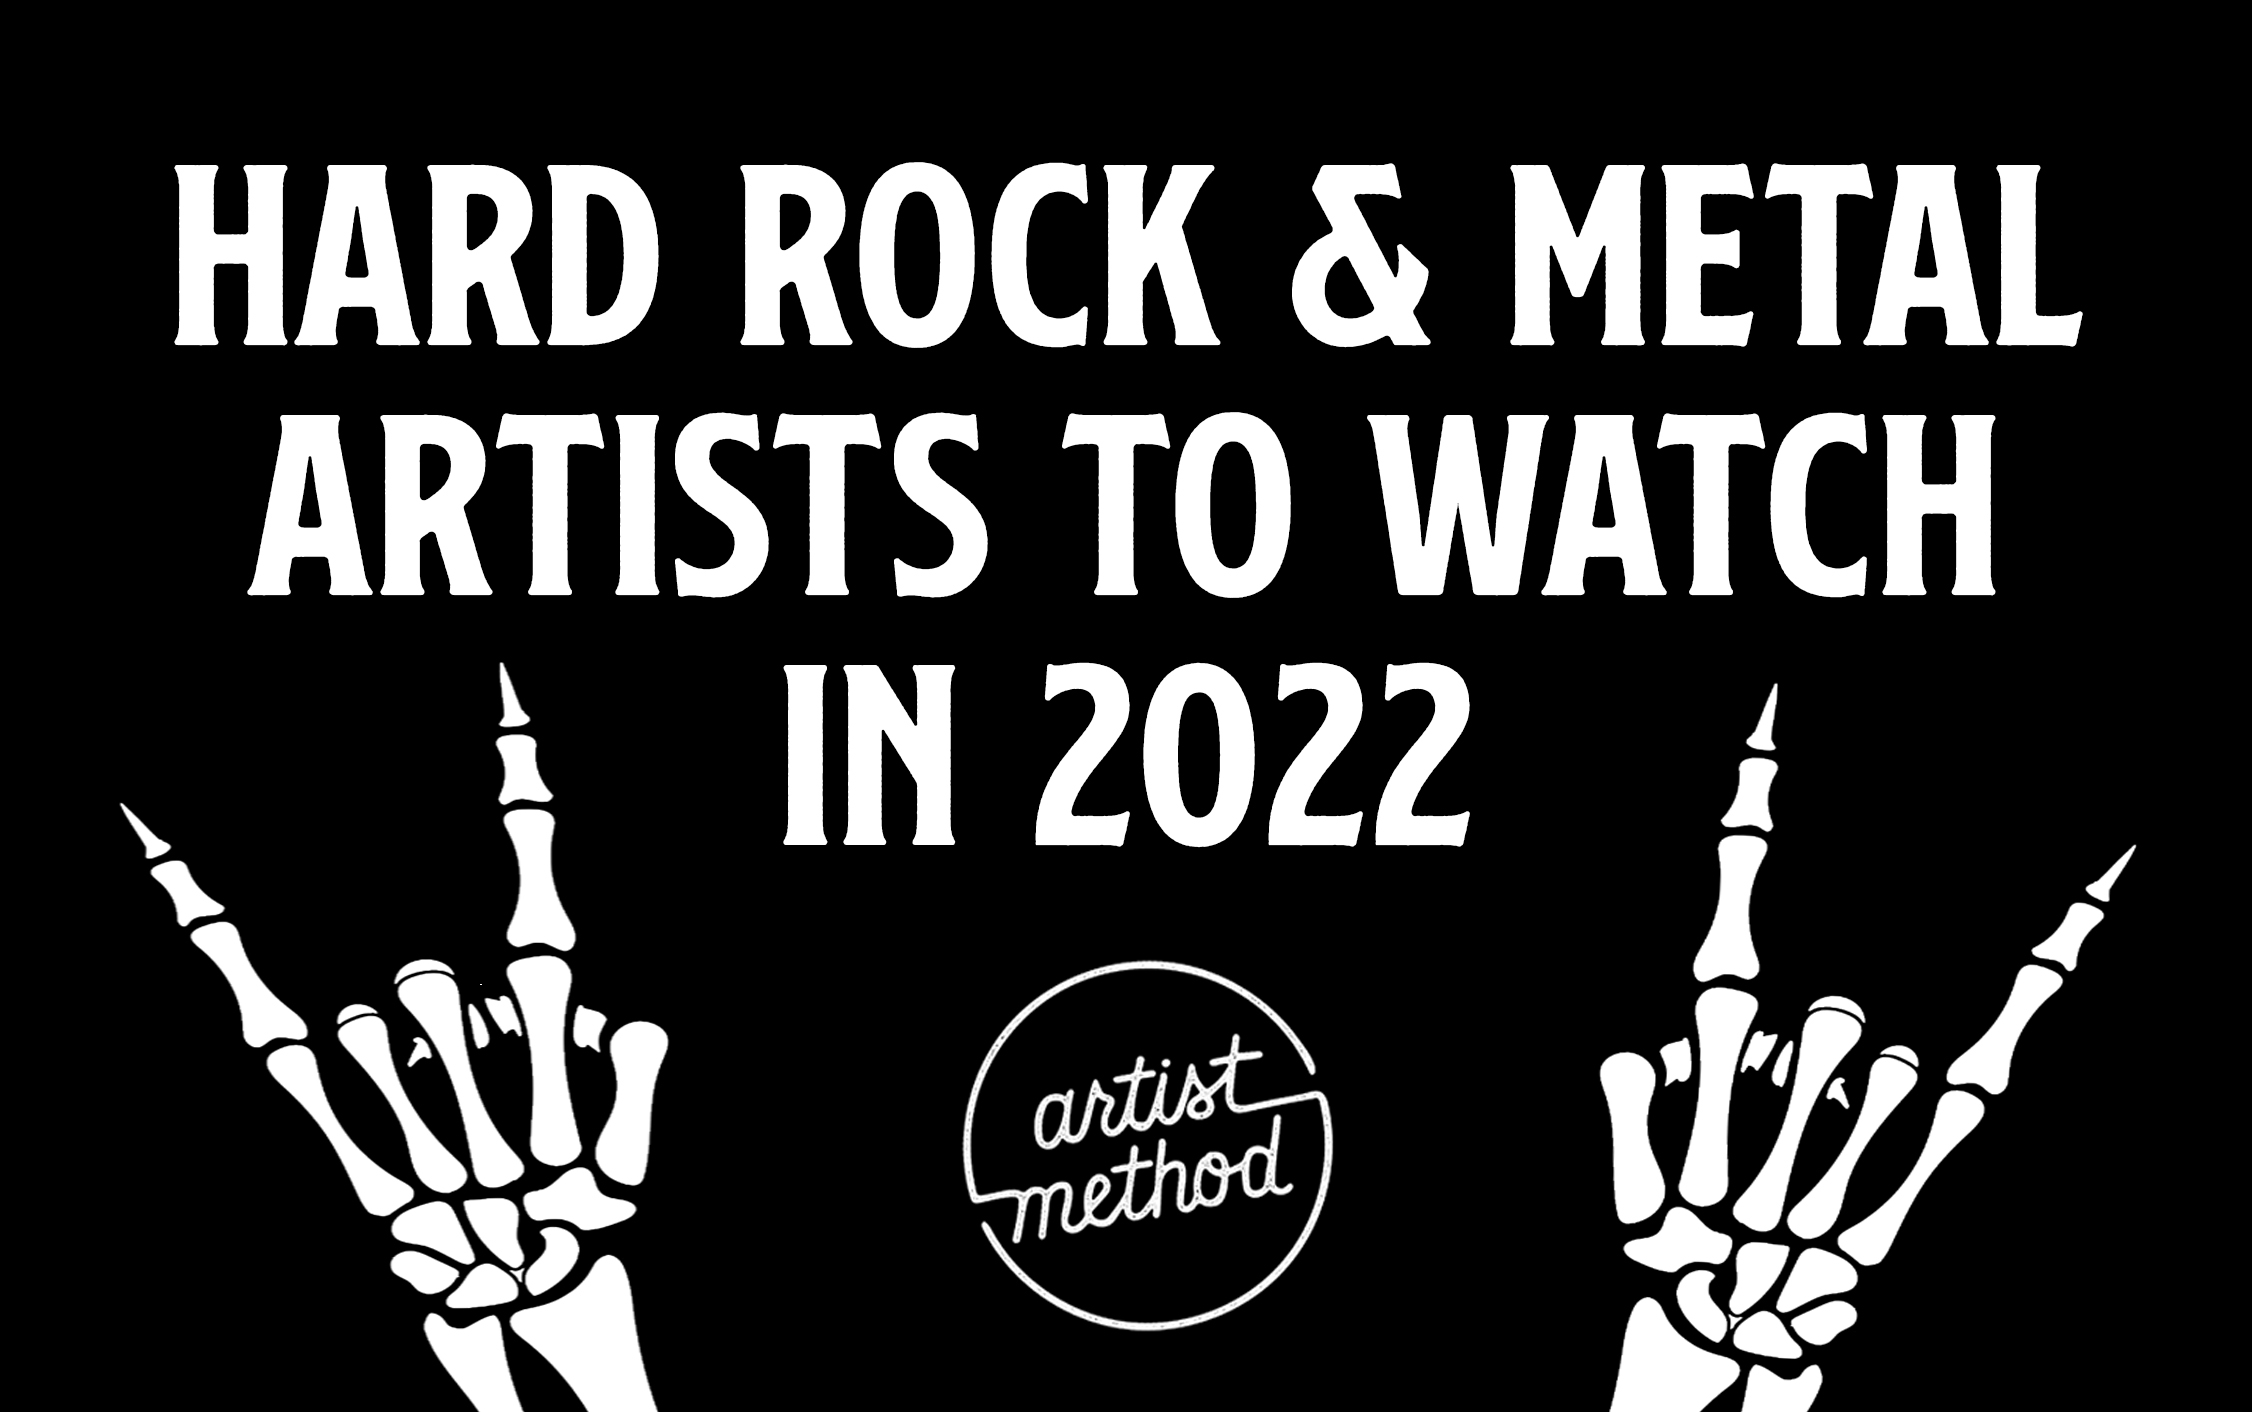 American rock bands to watch in 2022 making aggressive, uplifting and energetic music.